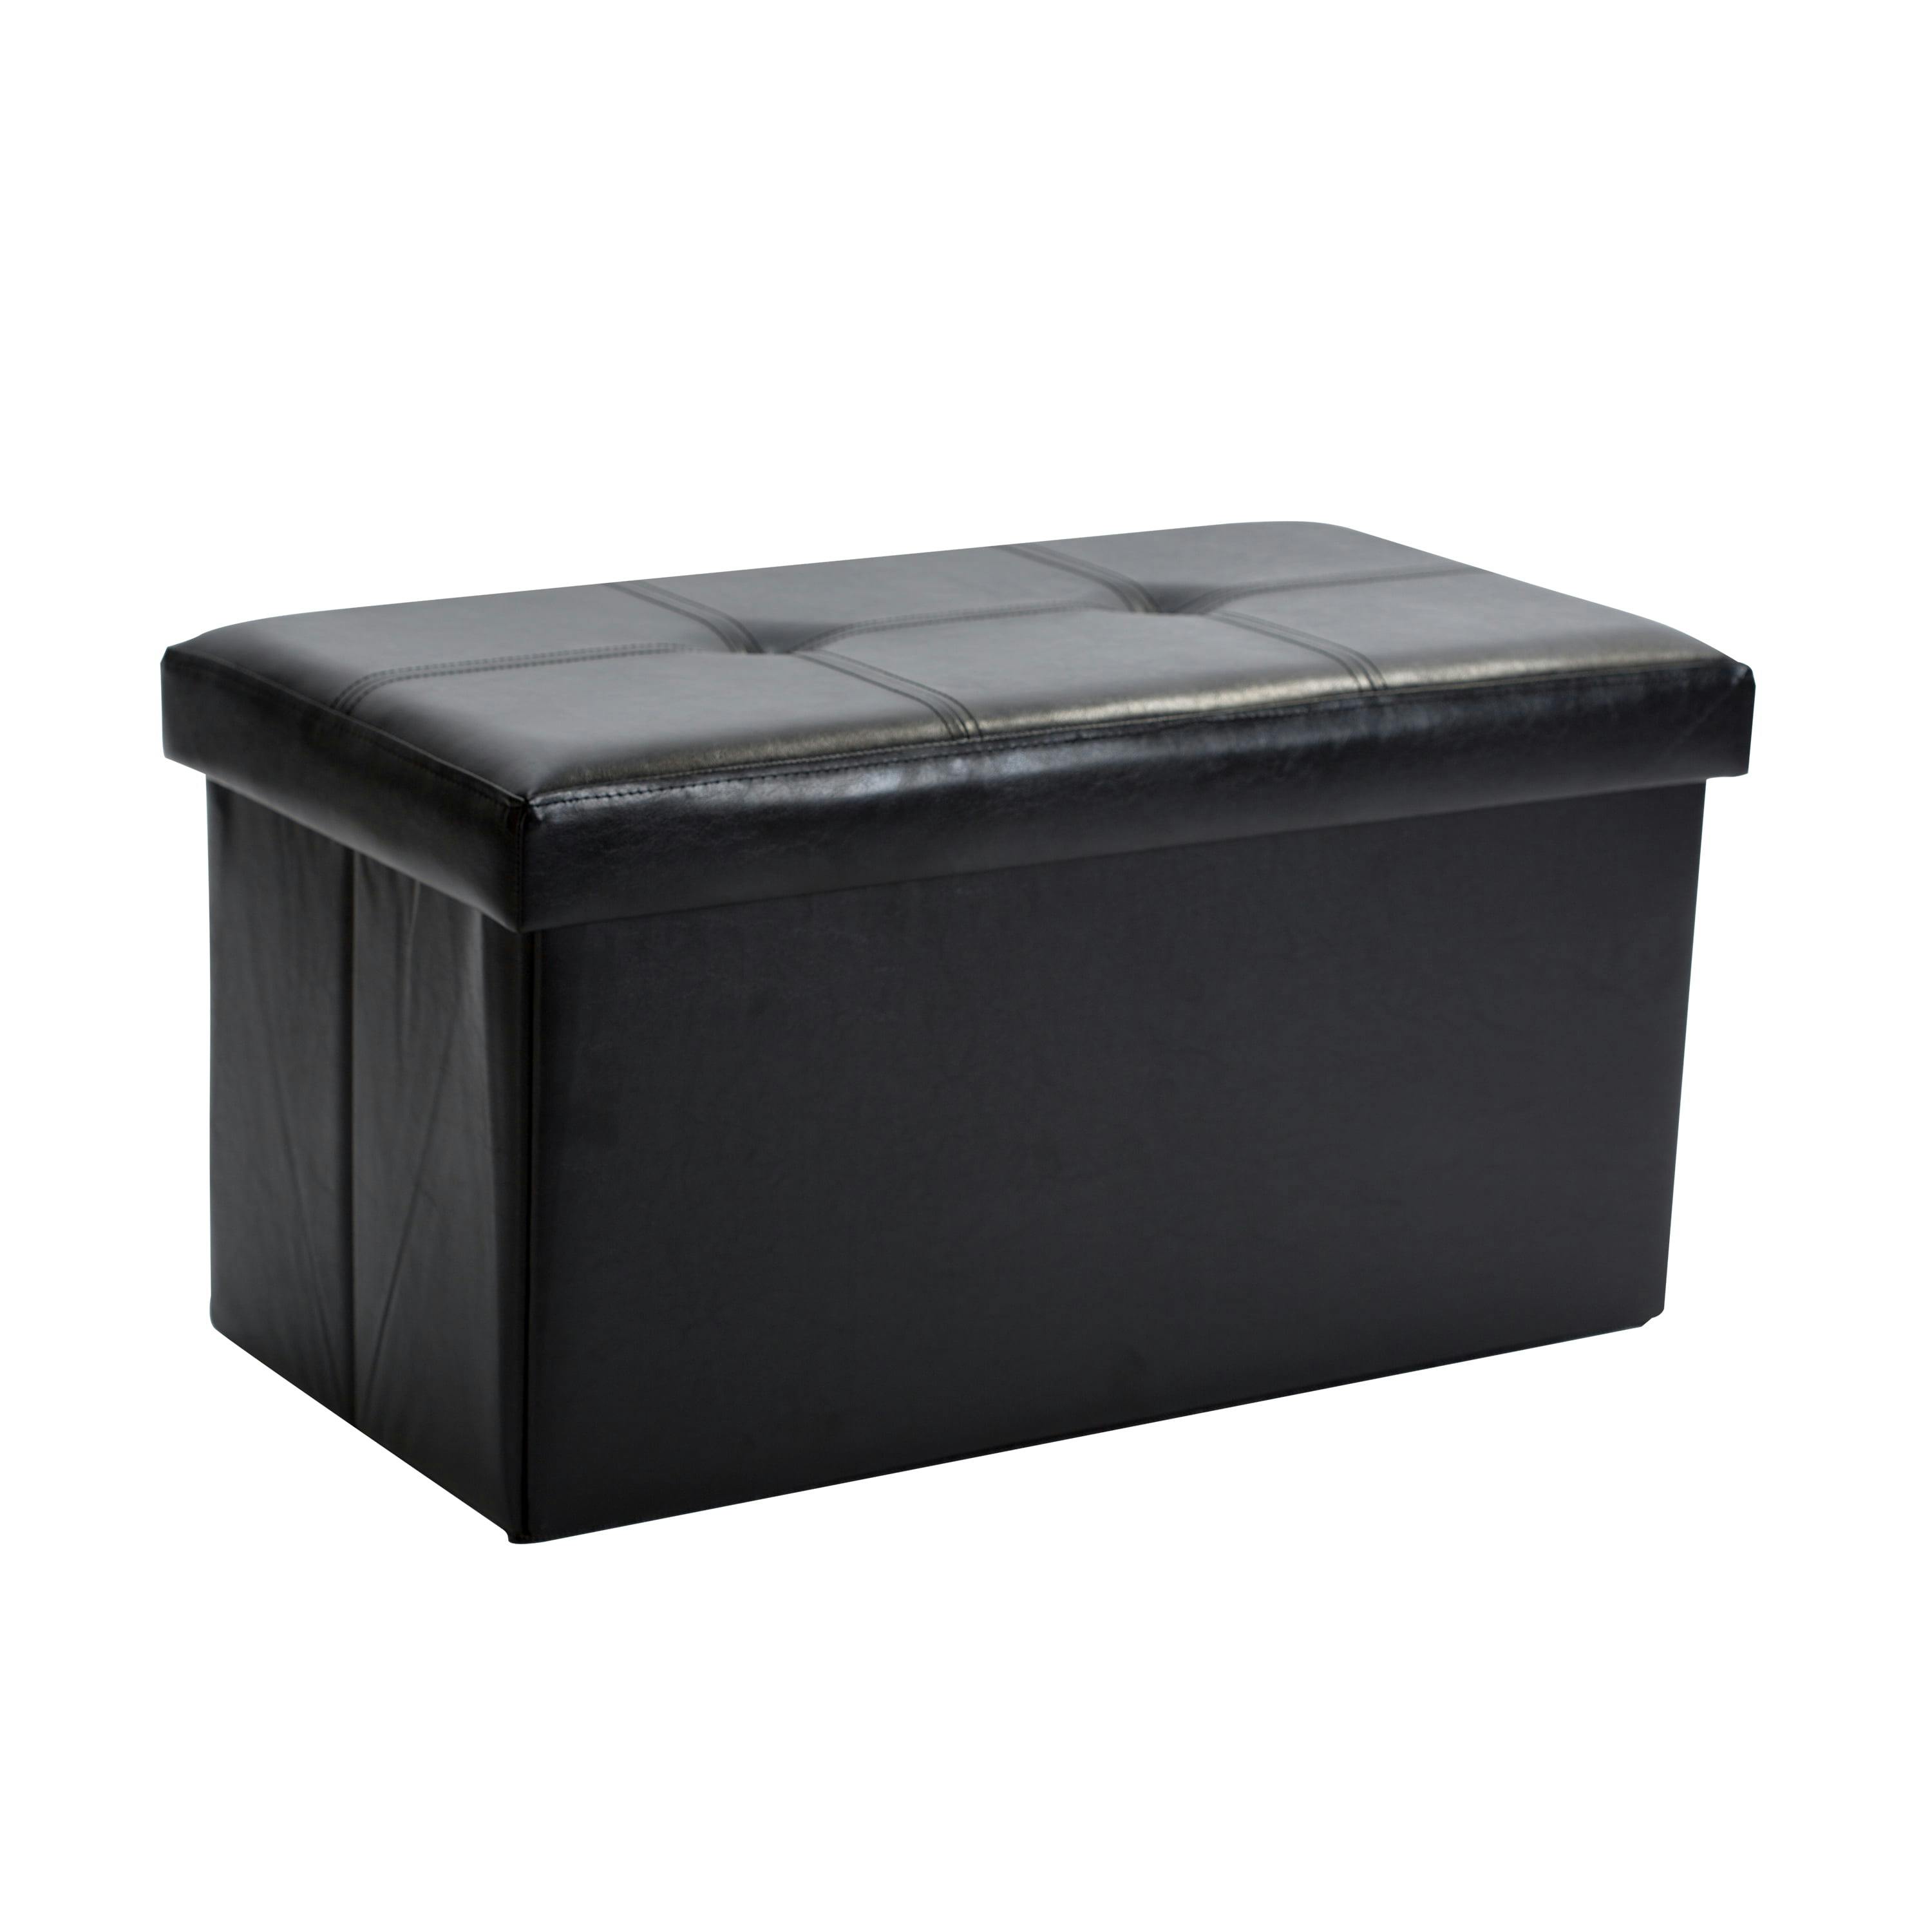 Black Faux Leather Collapsible Storage Ottoman with Tufted Top